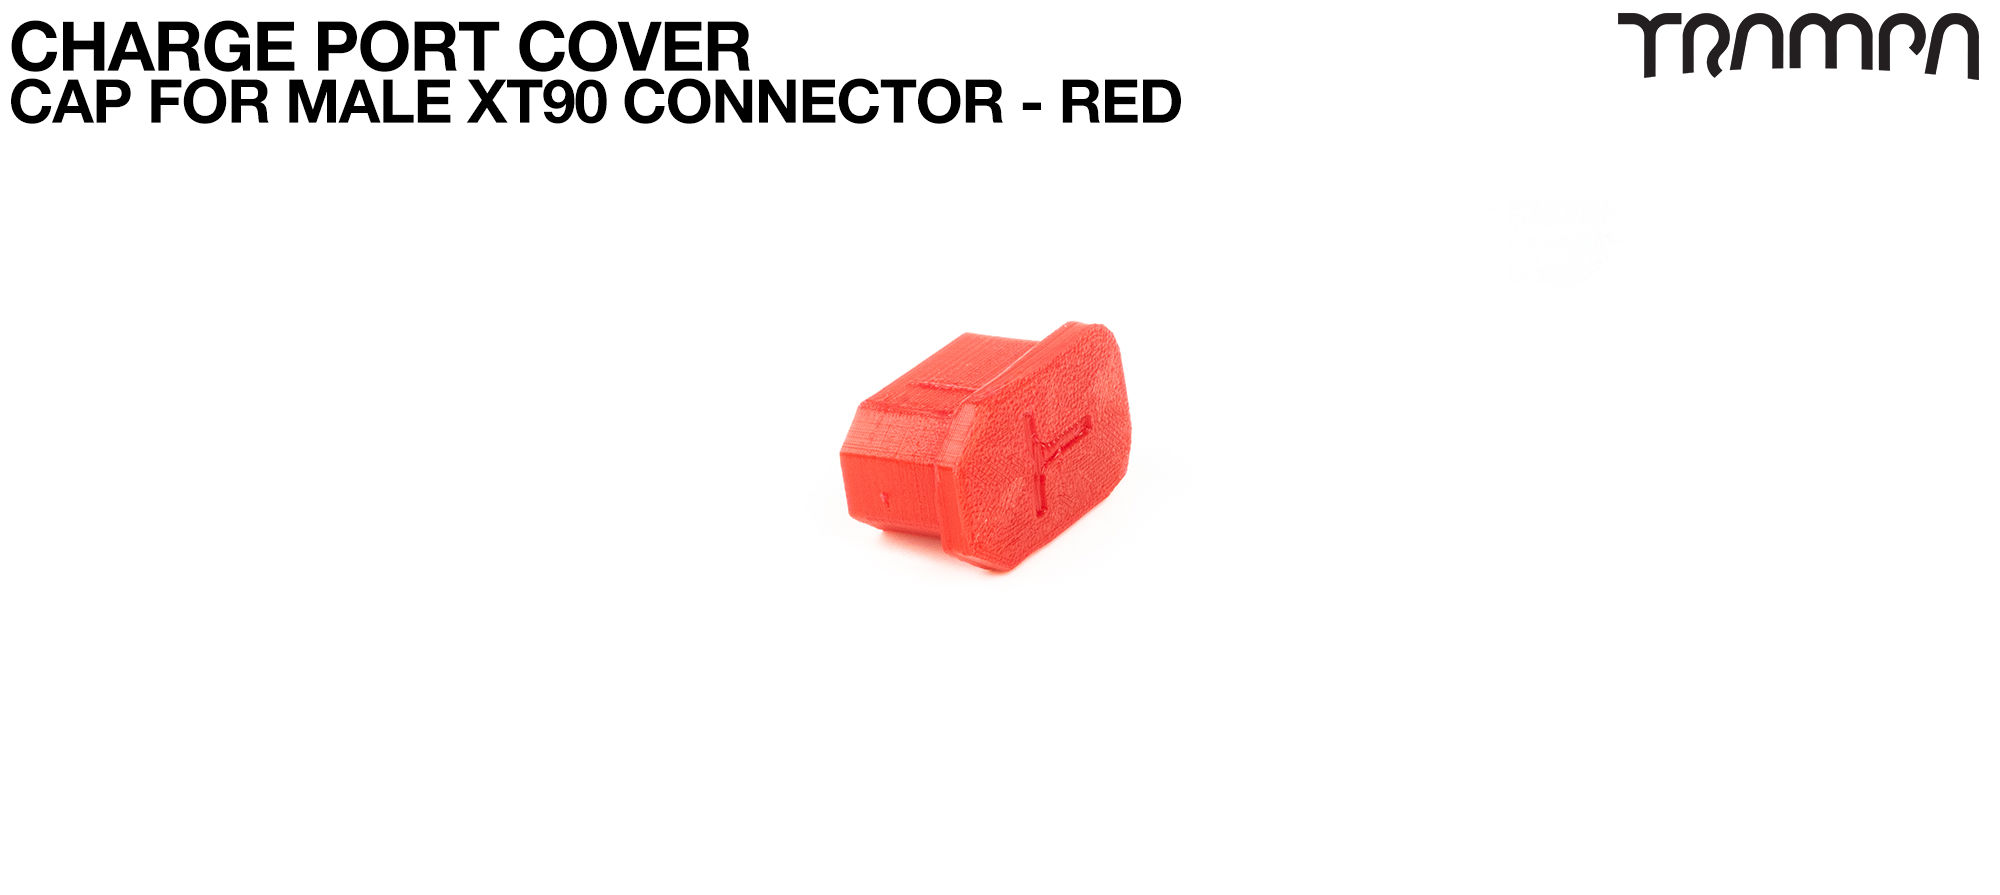 Charge Port Cover - CAP for Male XT90 Connector RED